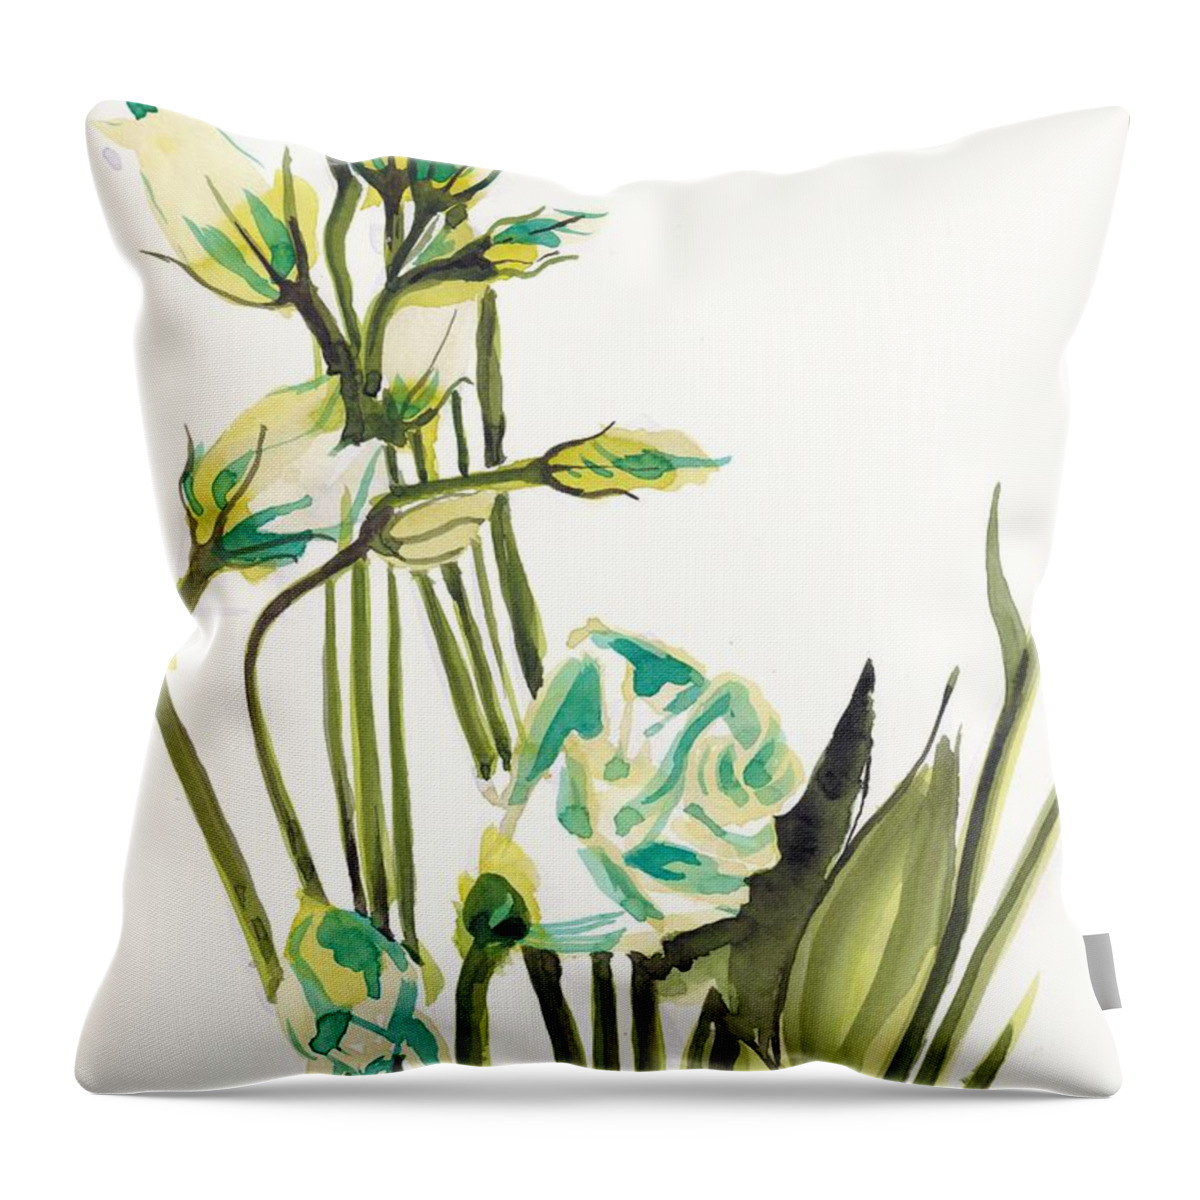 Flower Throw Pillow featuring the painting White Flowers by George Cret